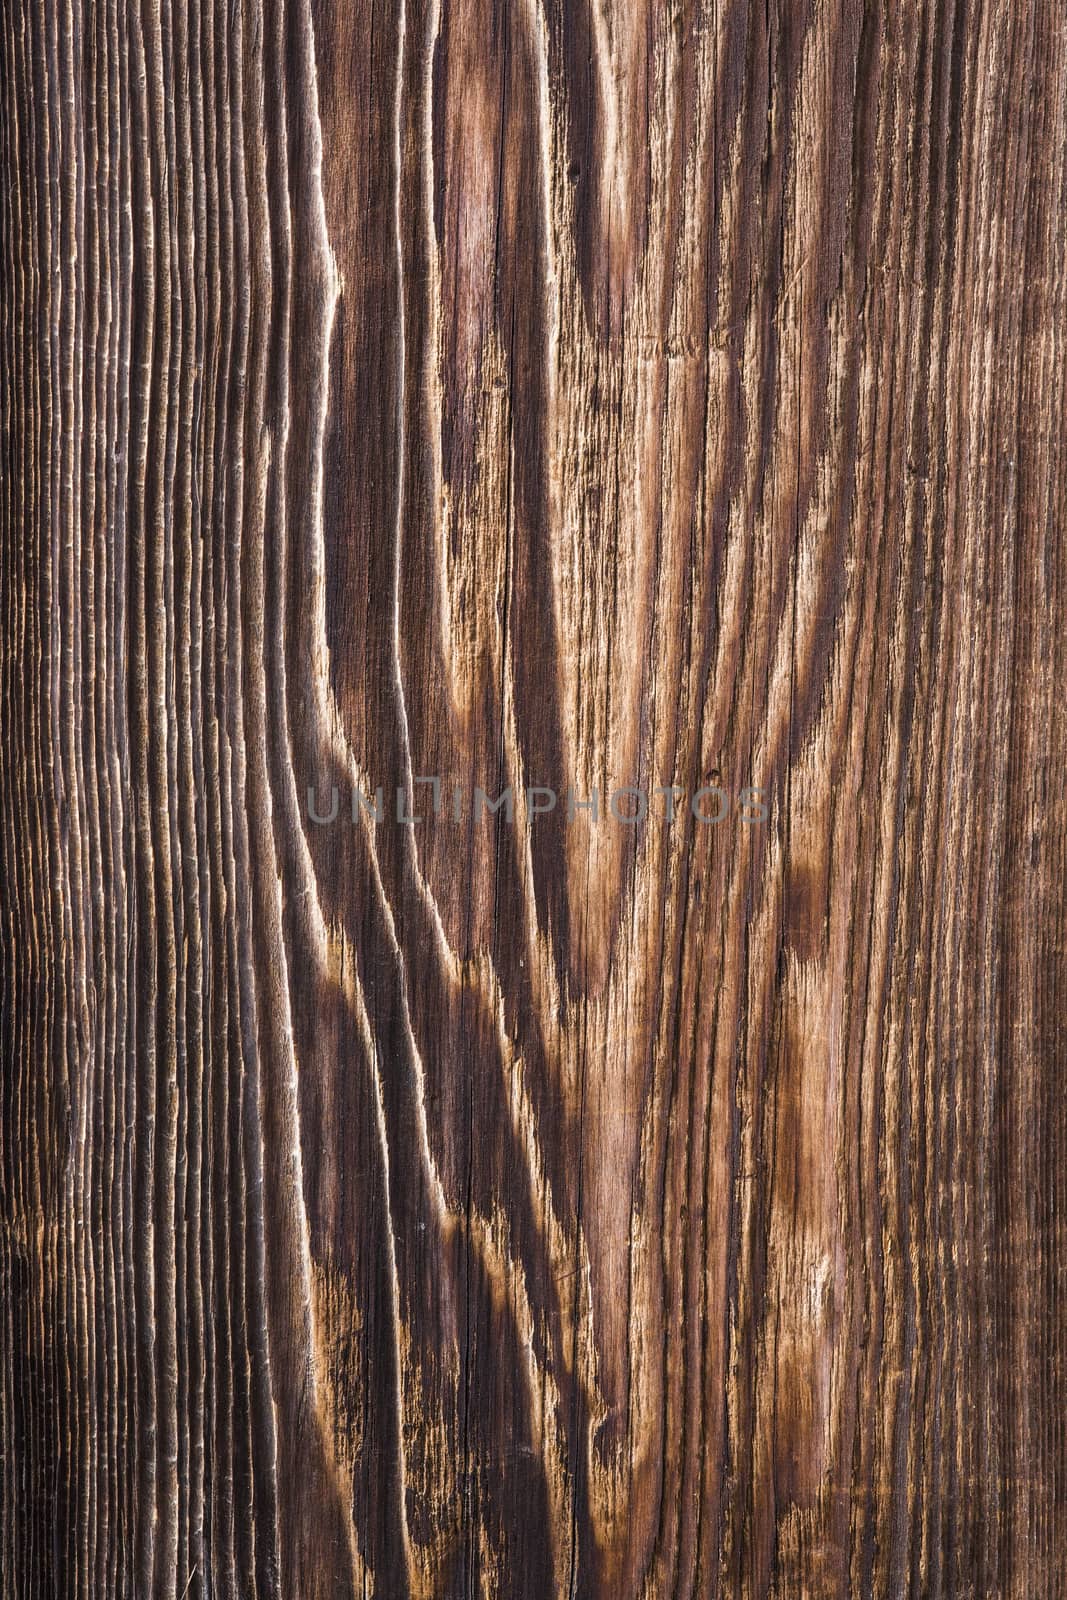 Wood Texture and background vintage style by 2nix